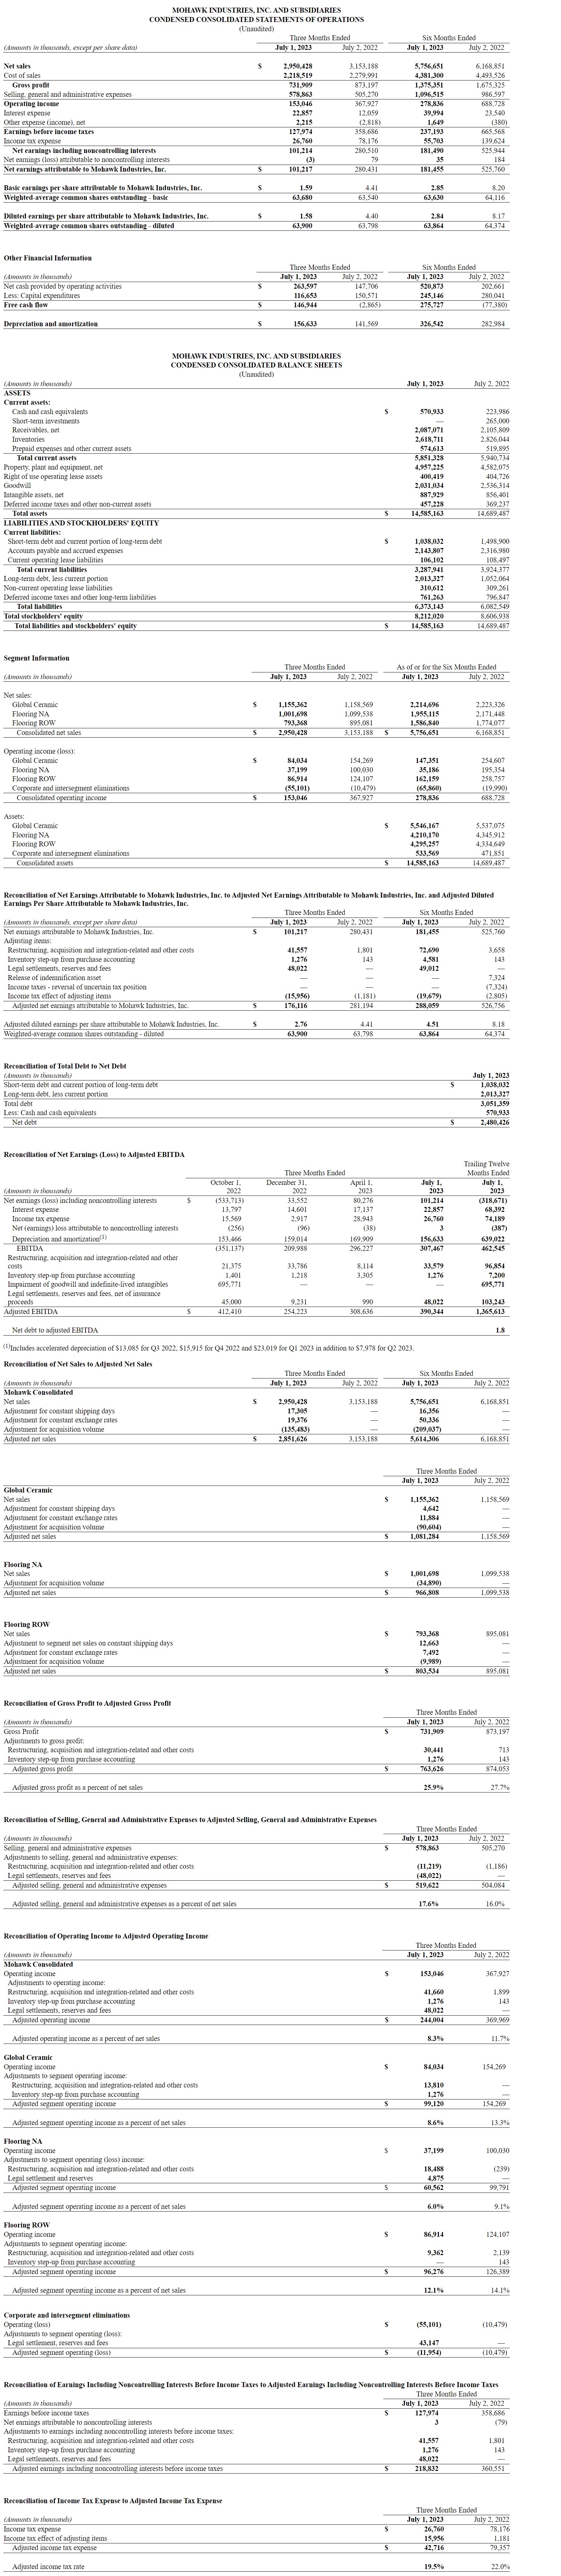 MOHAWK INDUSTRIES, INC. AND SUBSIDIARIES CONDENSED CONSOLIDATED STATEMENTS OF OPERATIONS